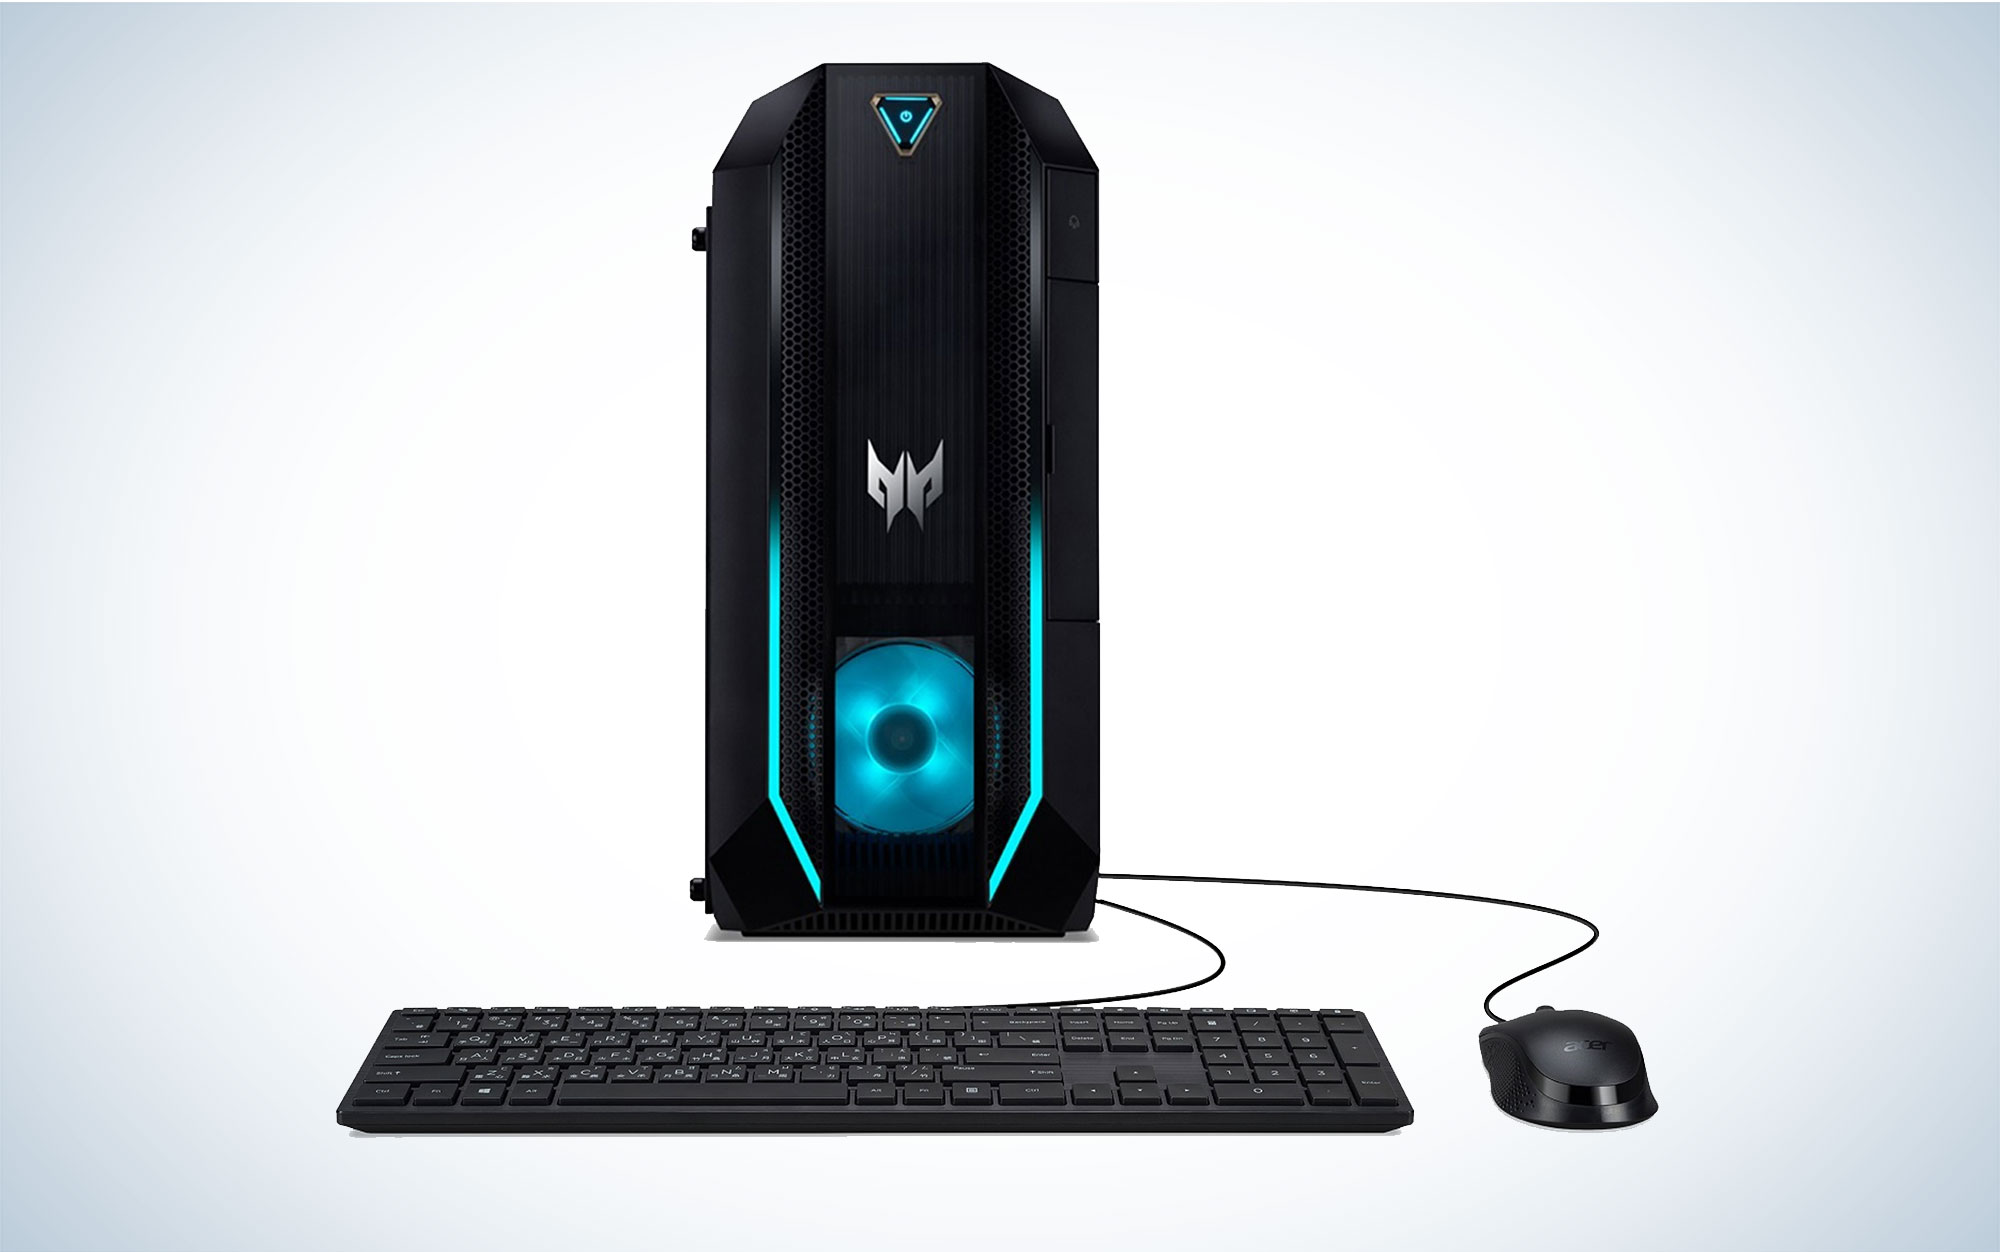 The best gaming PCs in 2023, tried and tested